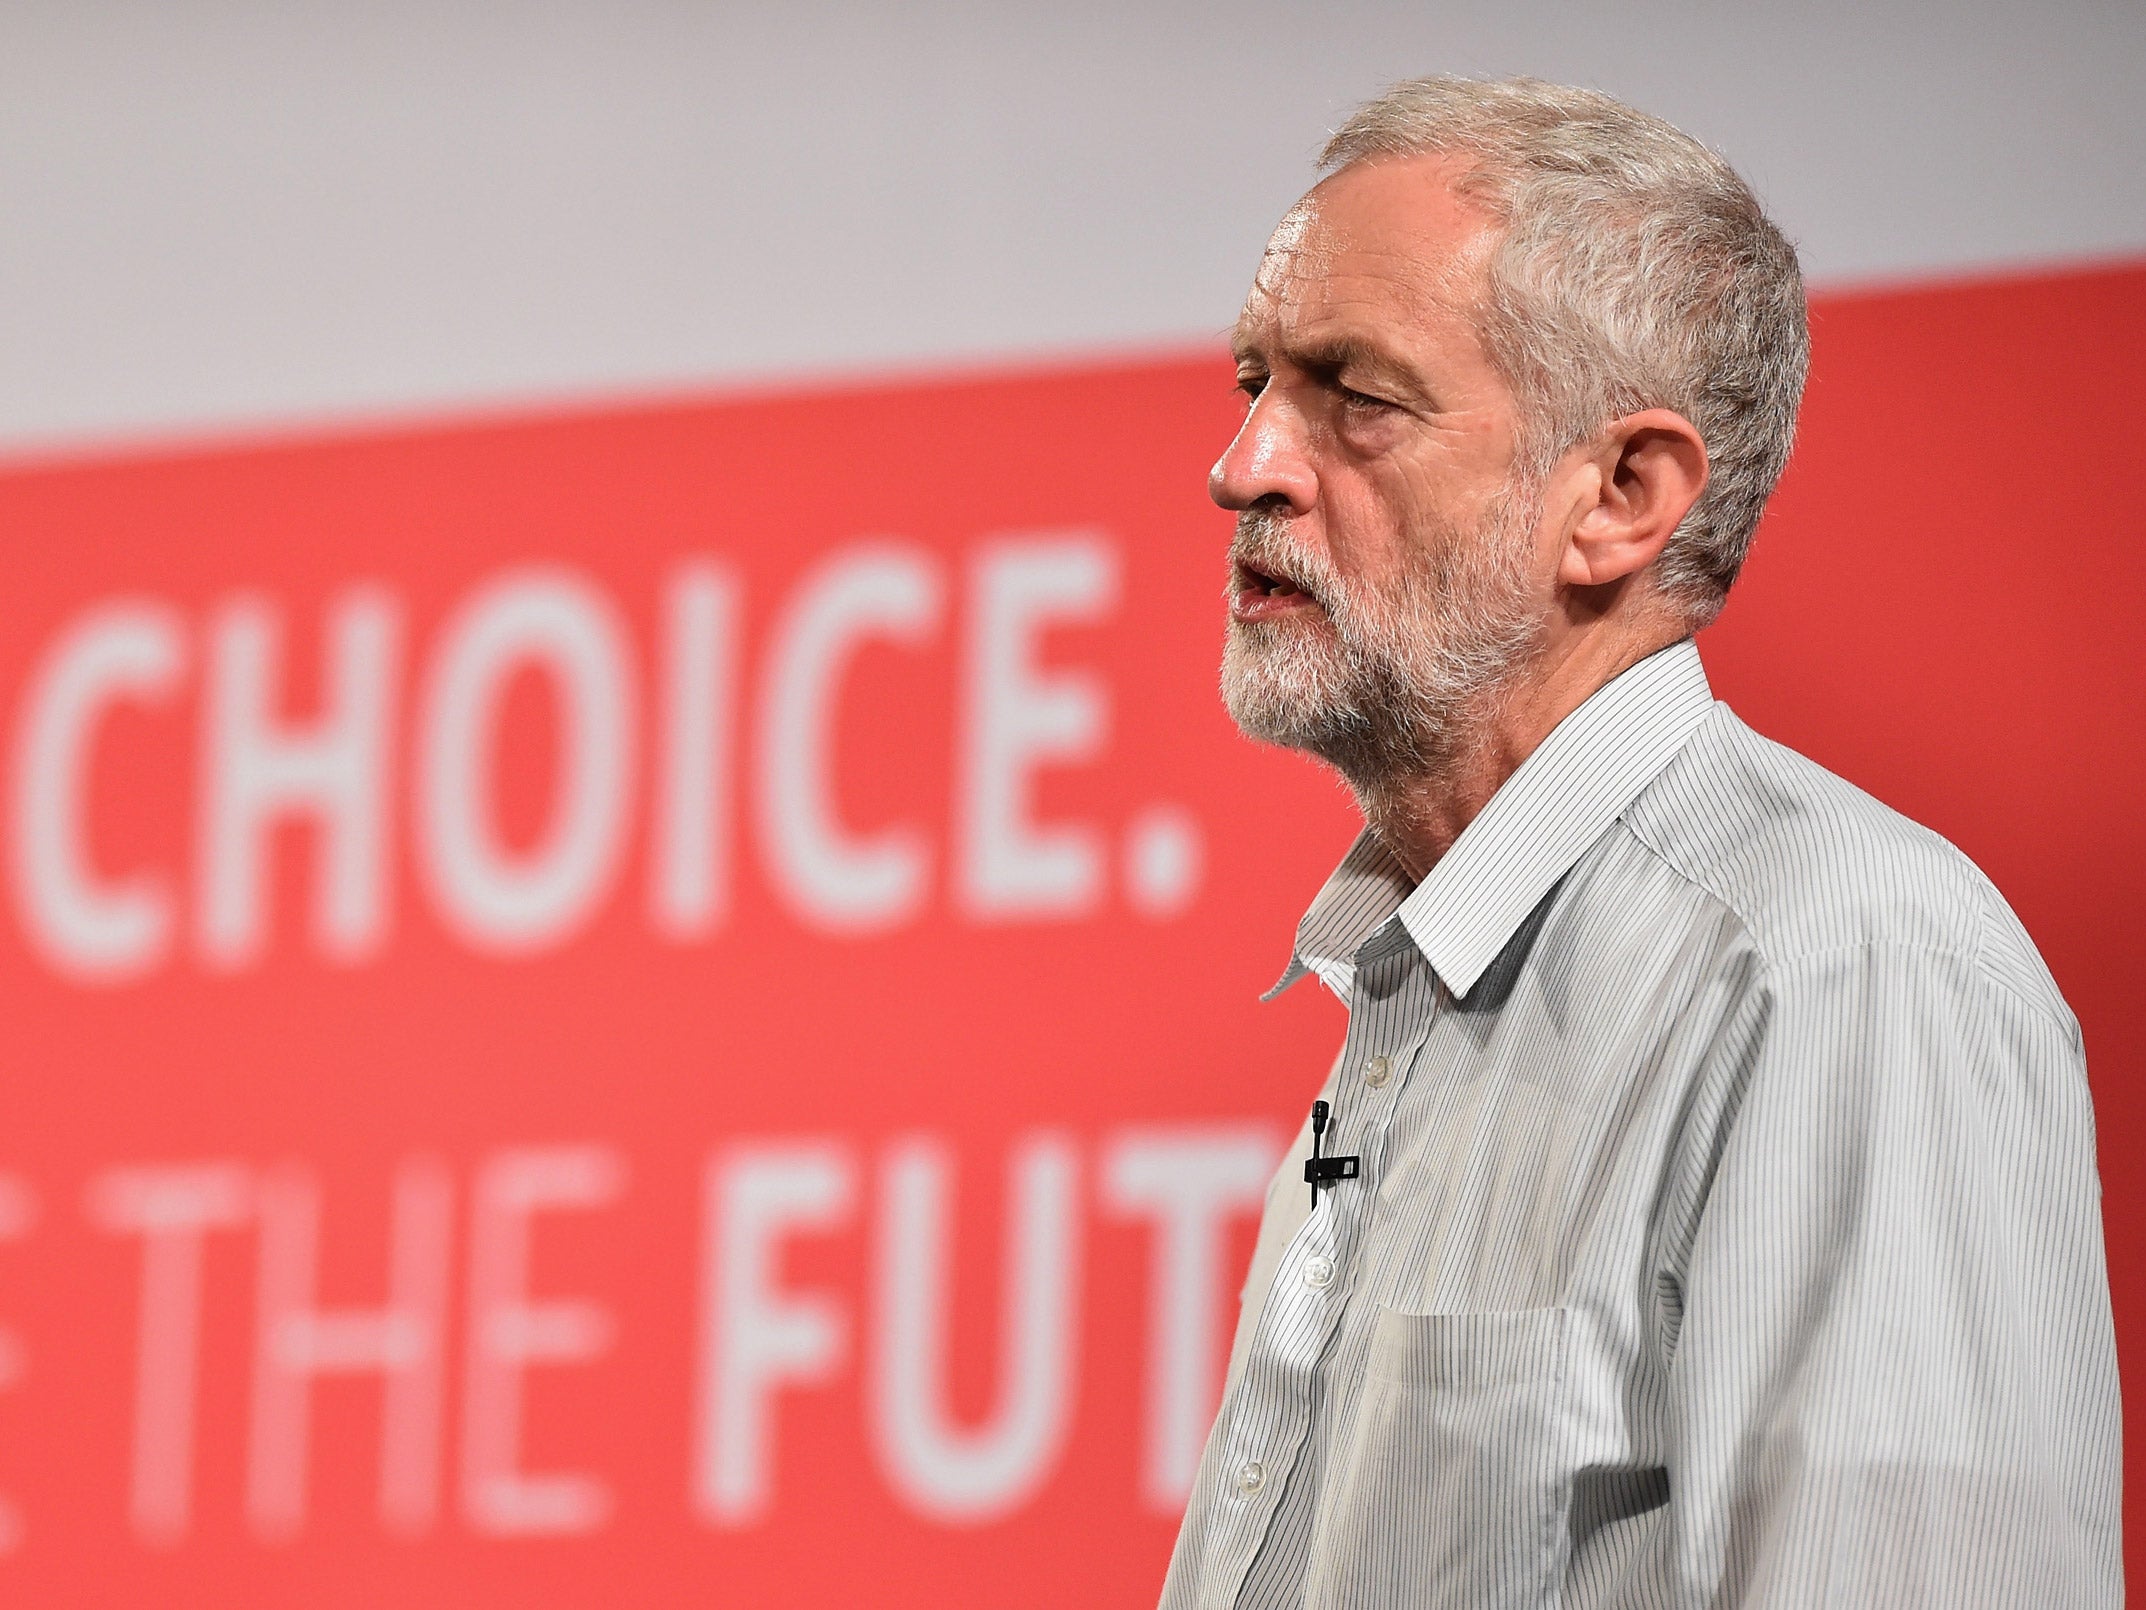 Jeremy Corbyn has become a surprise frontrunner for next Labour leader